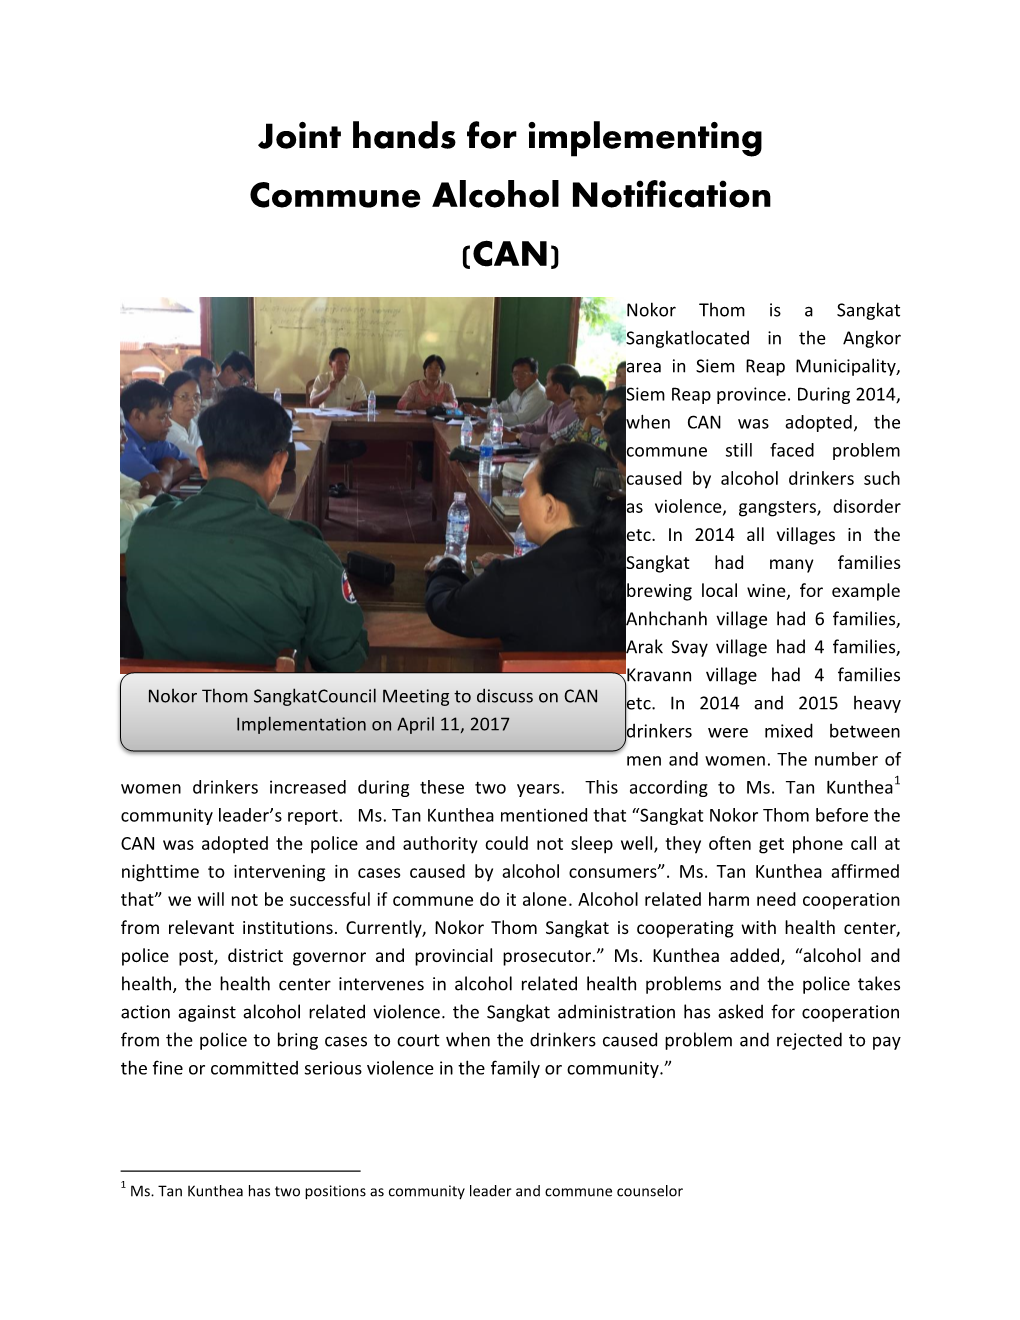 Joint Hands for Implementing Commune Alcohol Notification (CAN)